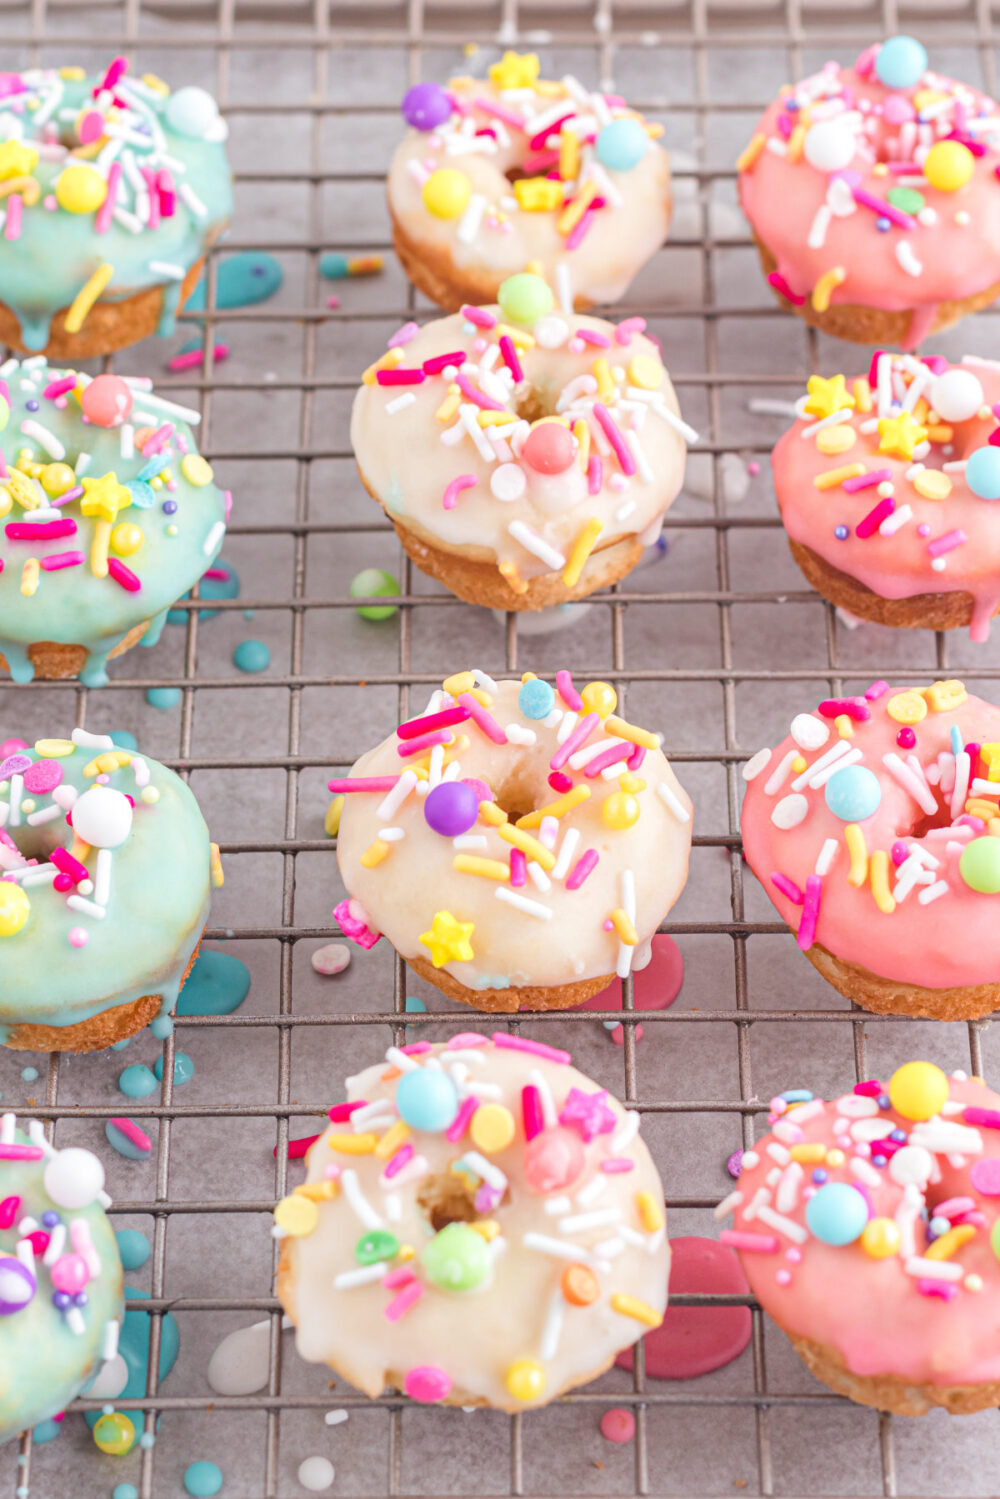 Blue, yellow, and pink glazed donuts on a cooling rack. 